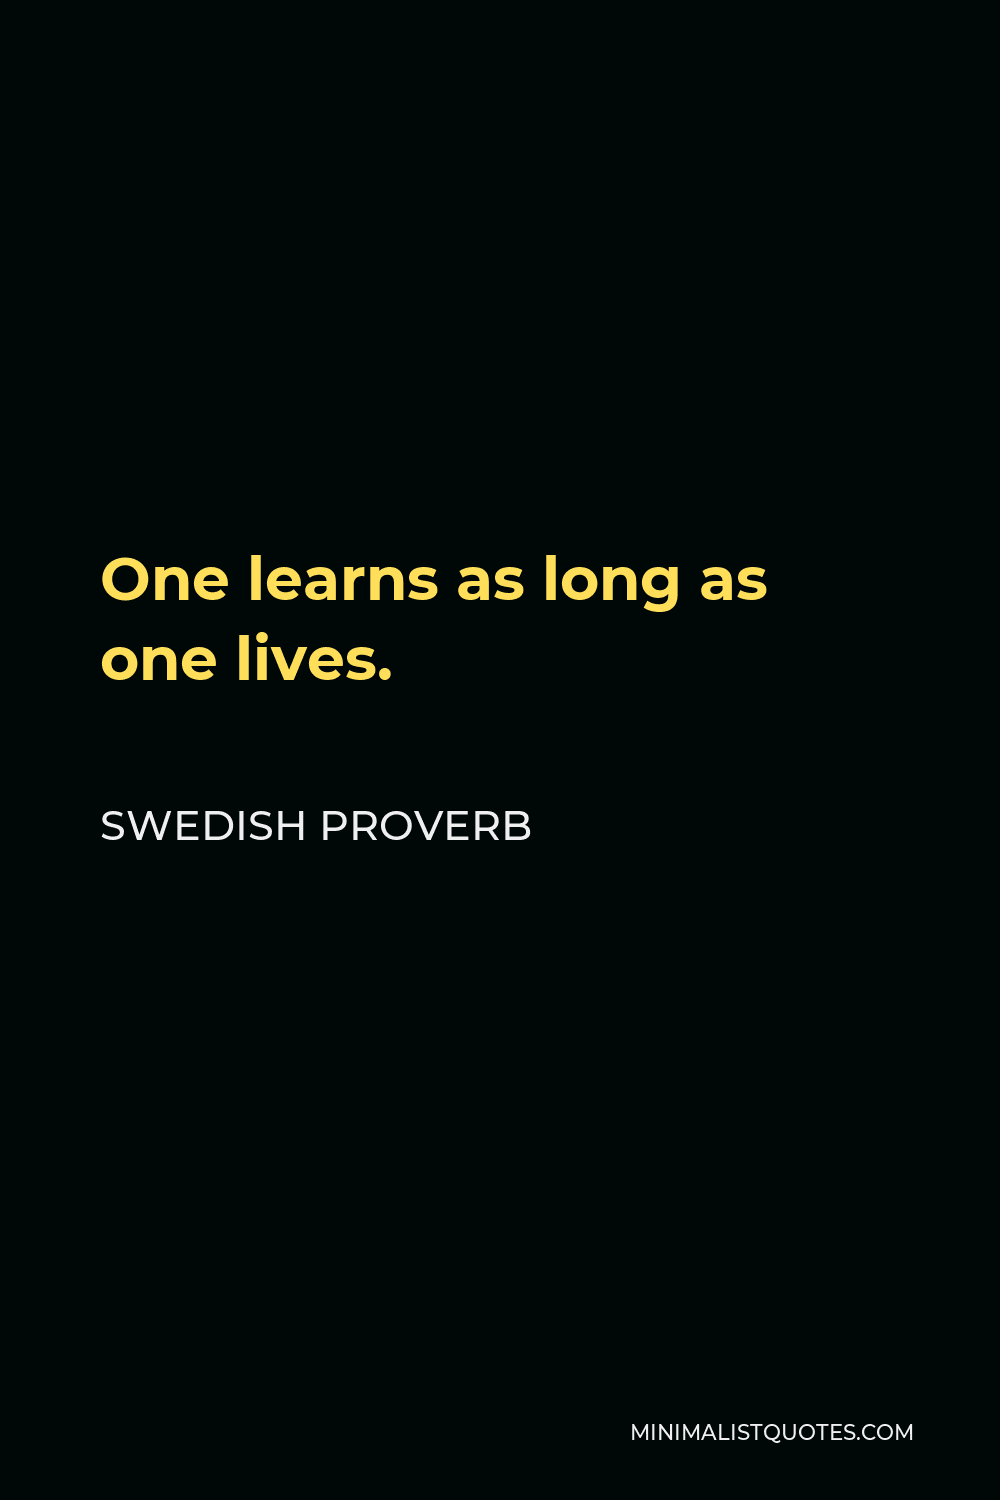 Swedish Proverb Quote - One learns as long as one lives.